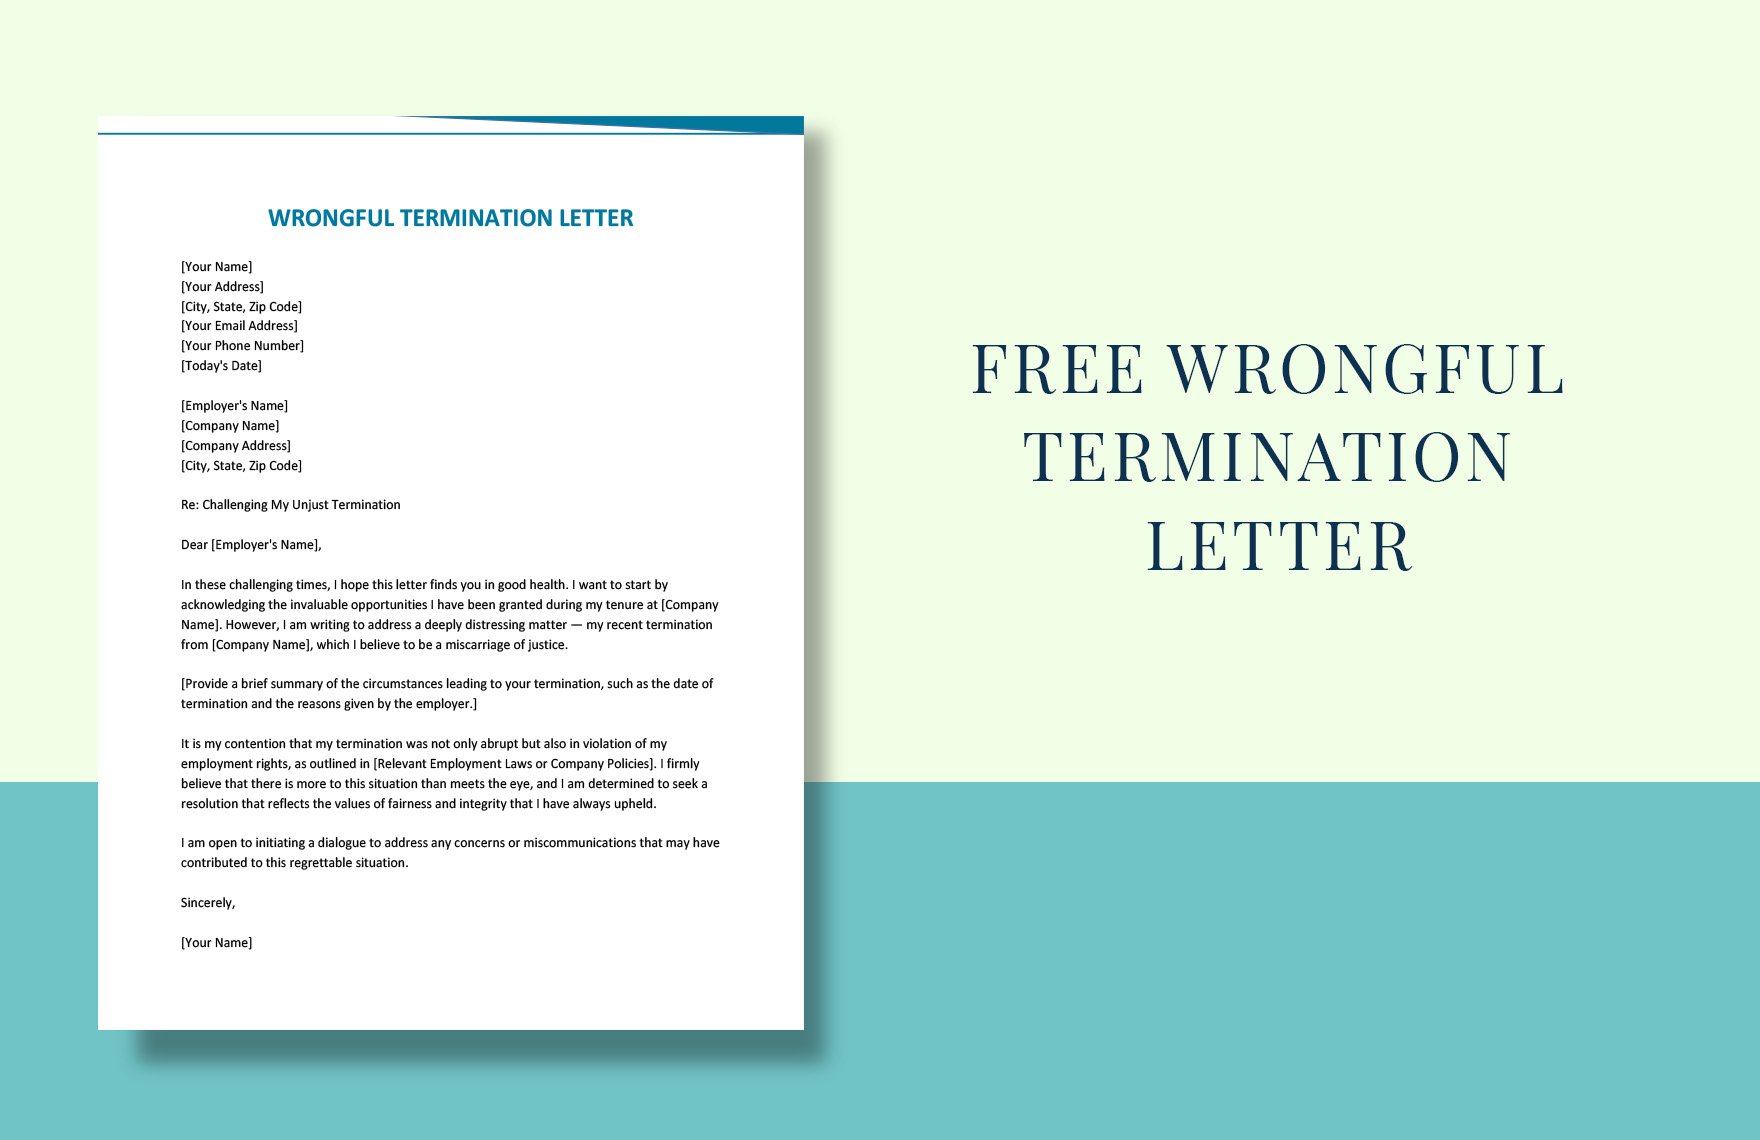 Wrongful Termination Letter in Word, Google Docs